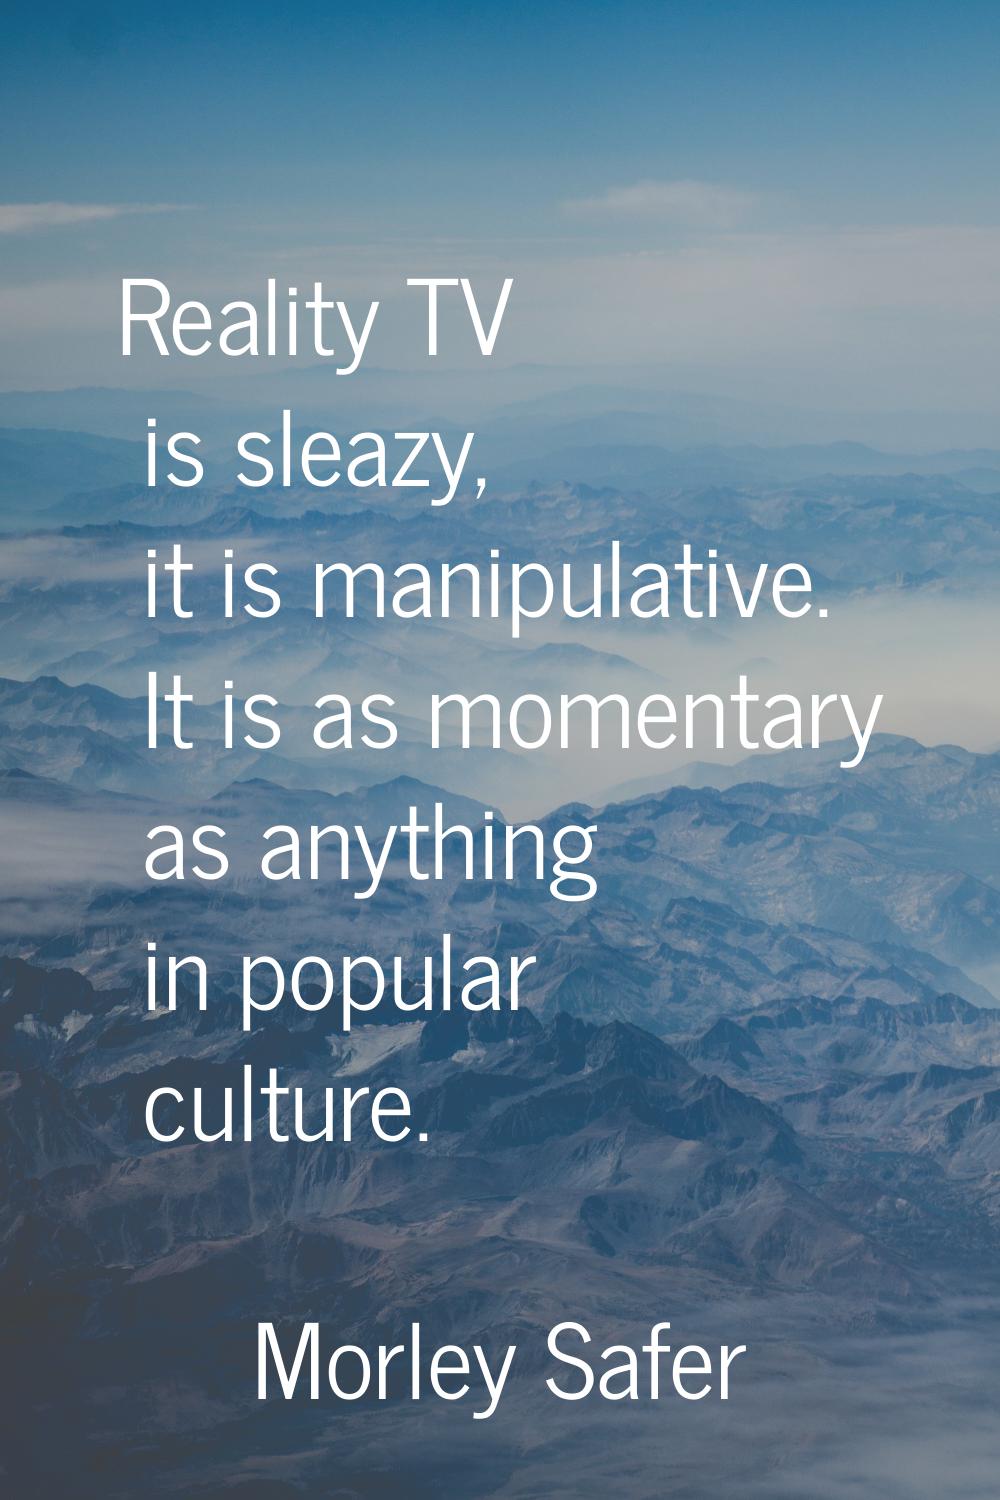 Reality TV is sleazy, it is manipulative. It is as momentary as anything in popular culture.